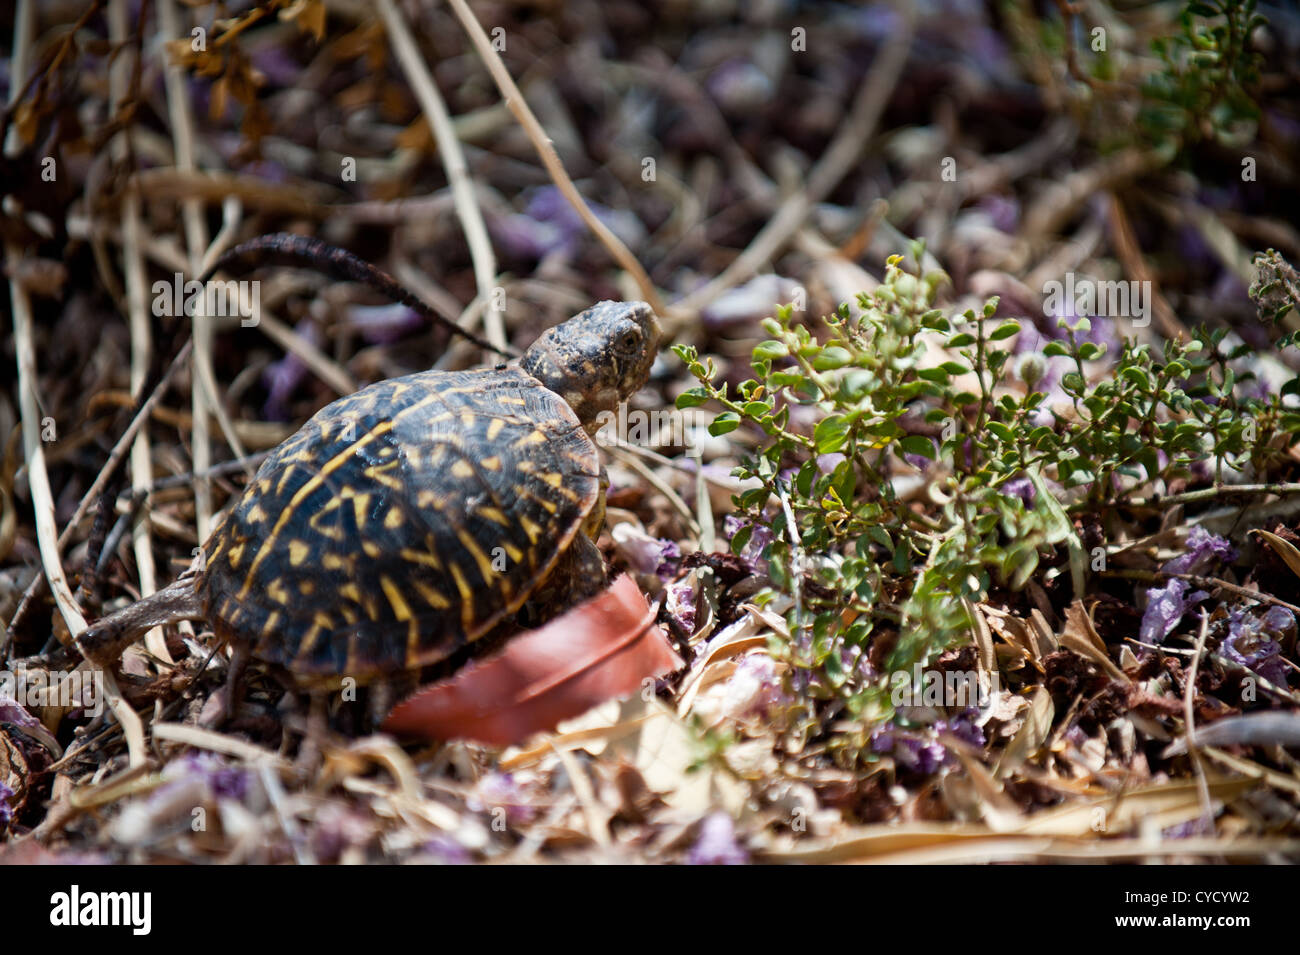 Western Ornate Box Turtle, female, approx. 10 years old Stock Photo